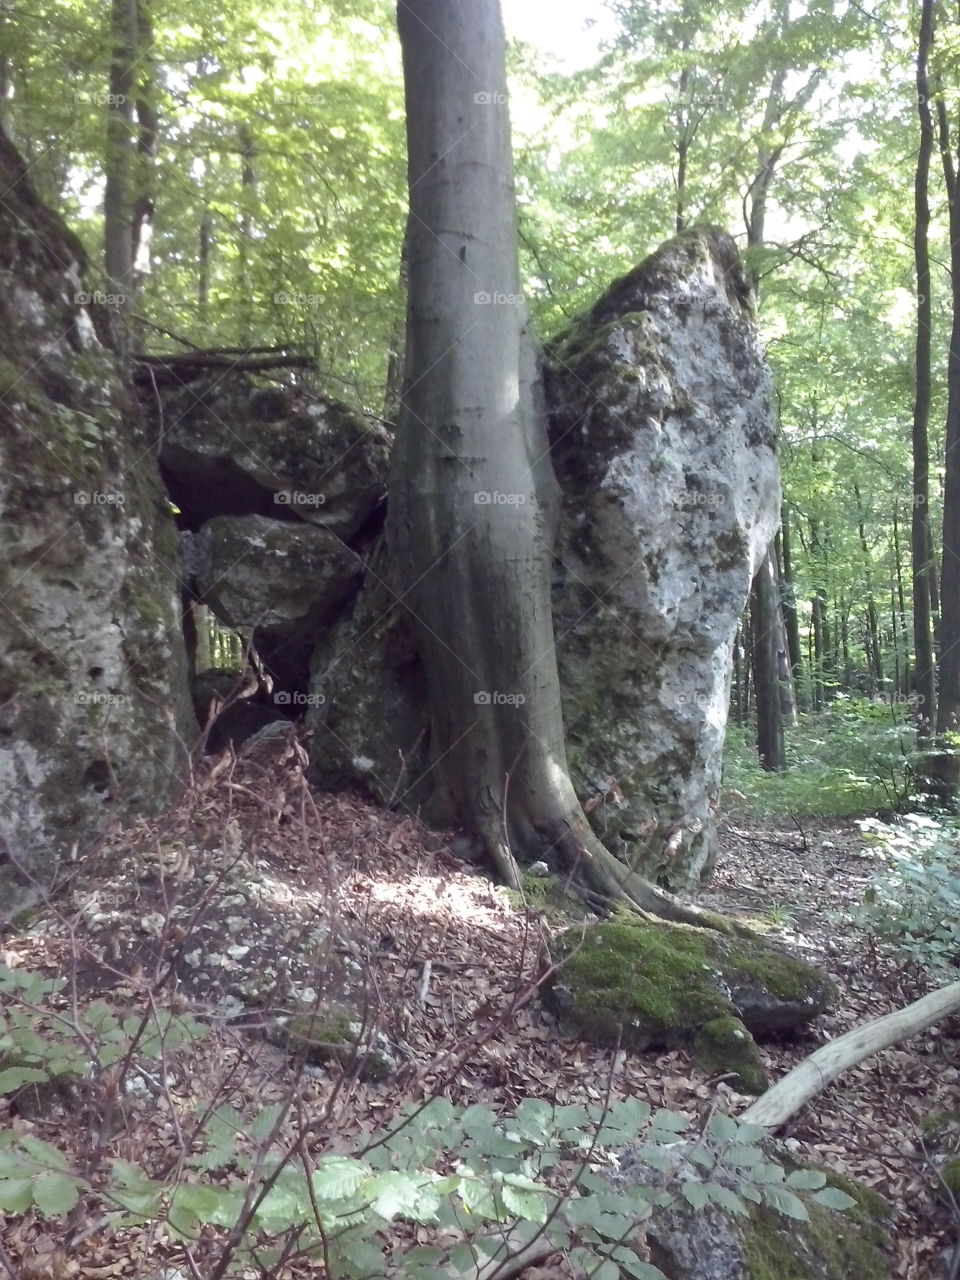 #rocktree. somewhere in forest